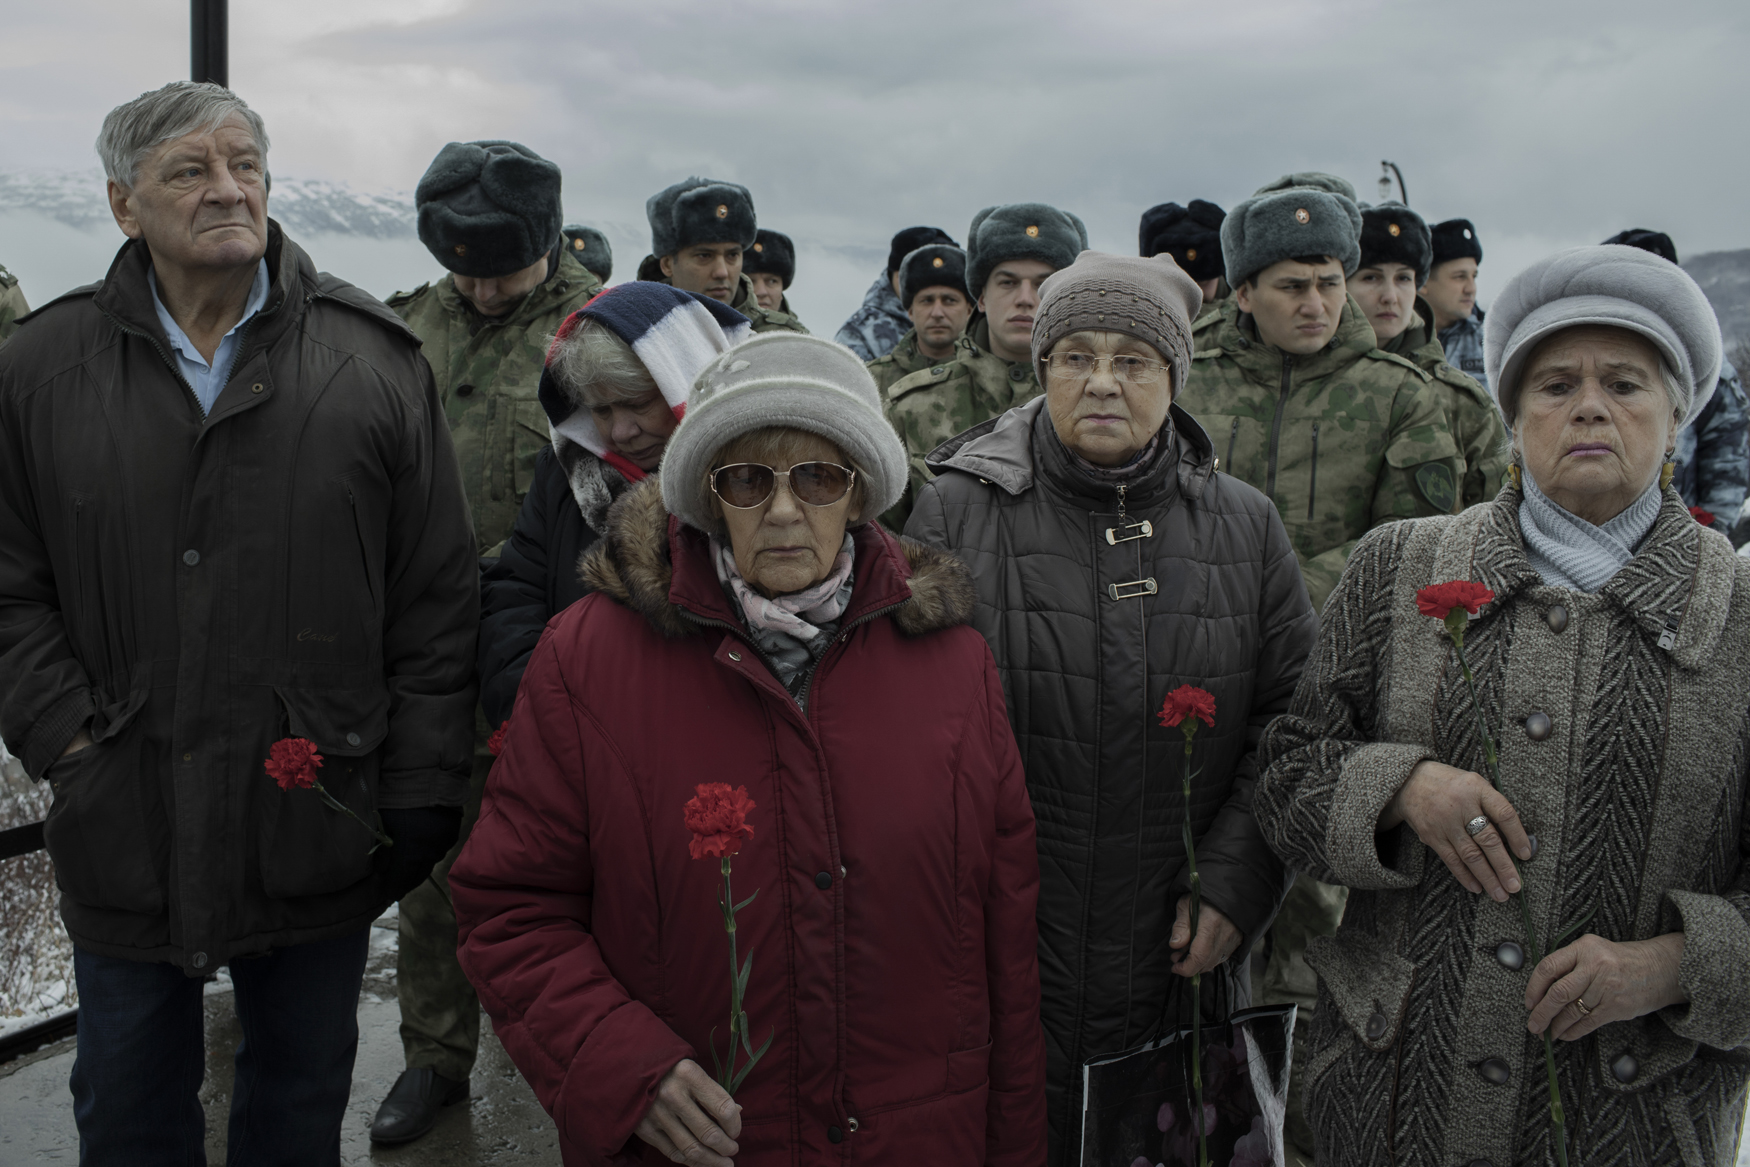 MAGADAN, Russia - 30 October, 2019. Descendants of victims of political repression commemorate those who died in the Soviet forced labour camps of the Kolyma region. At the 'Mask of Sorrow' monument, which stands above the city of Magadan, they are joined by officials and service members. © Emile Ducke Kolyma, Along the Road of Bones